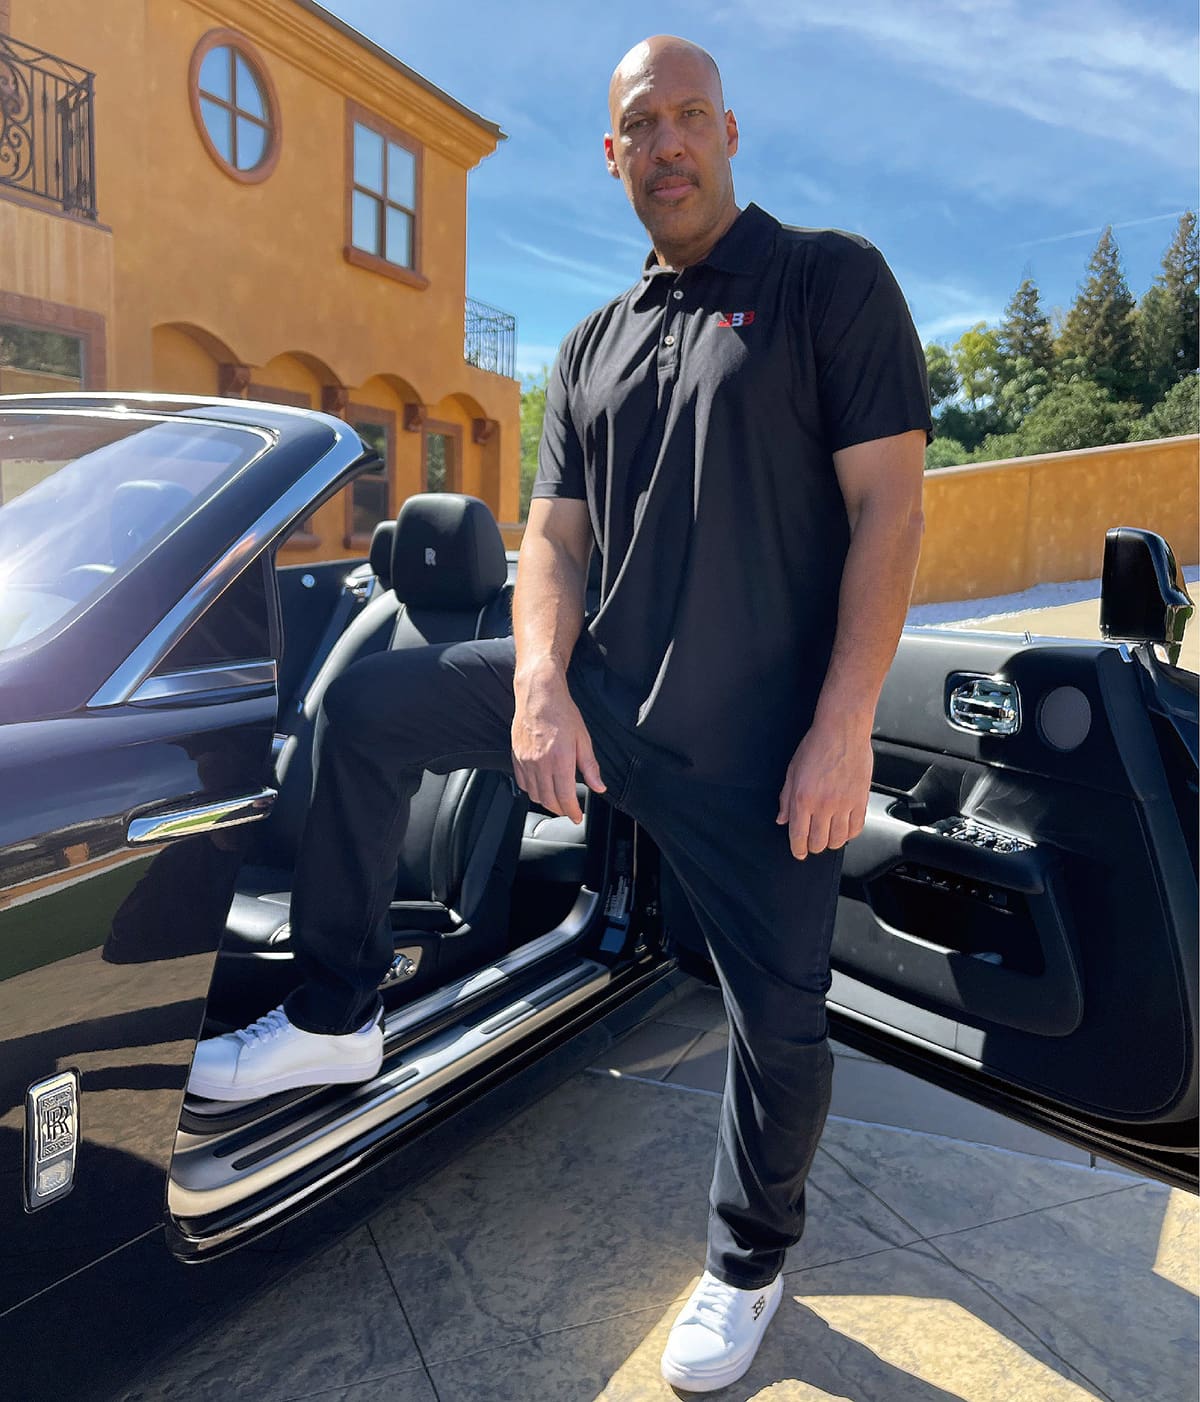 LaMelo Ball's father, LaVar Ball, is the founder and CEO of the clothing and shoe company Big Baller Brand